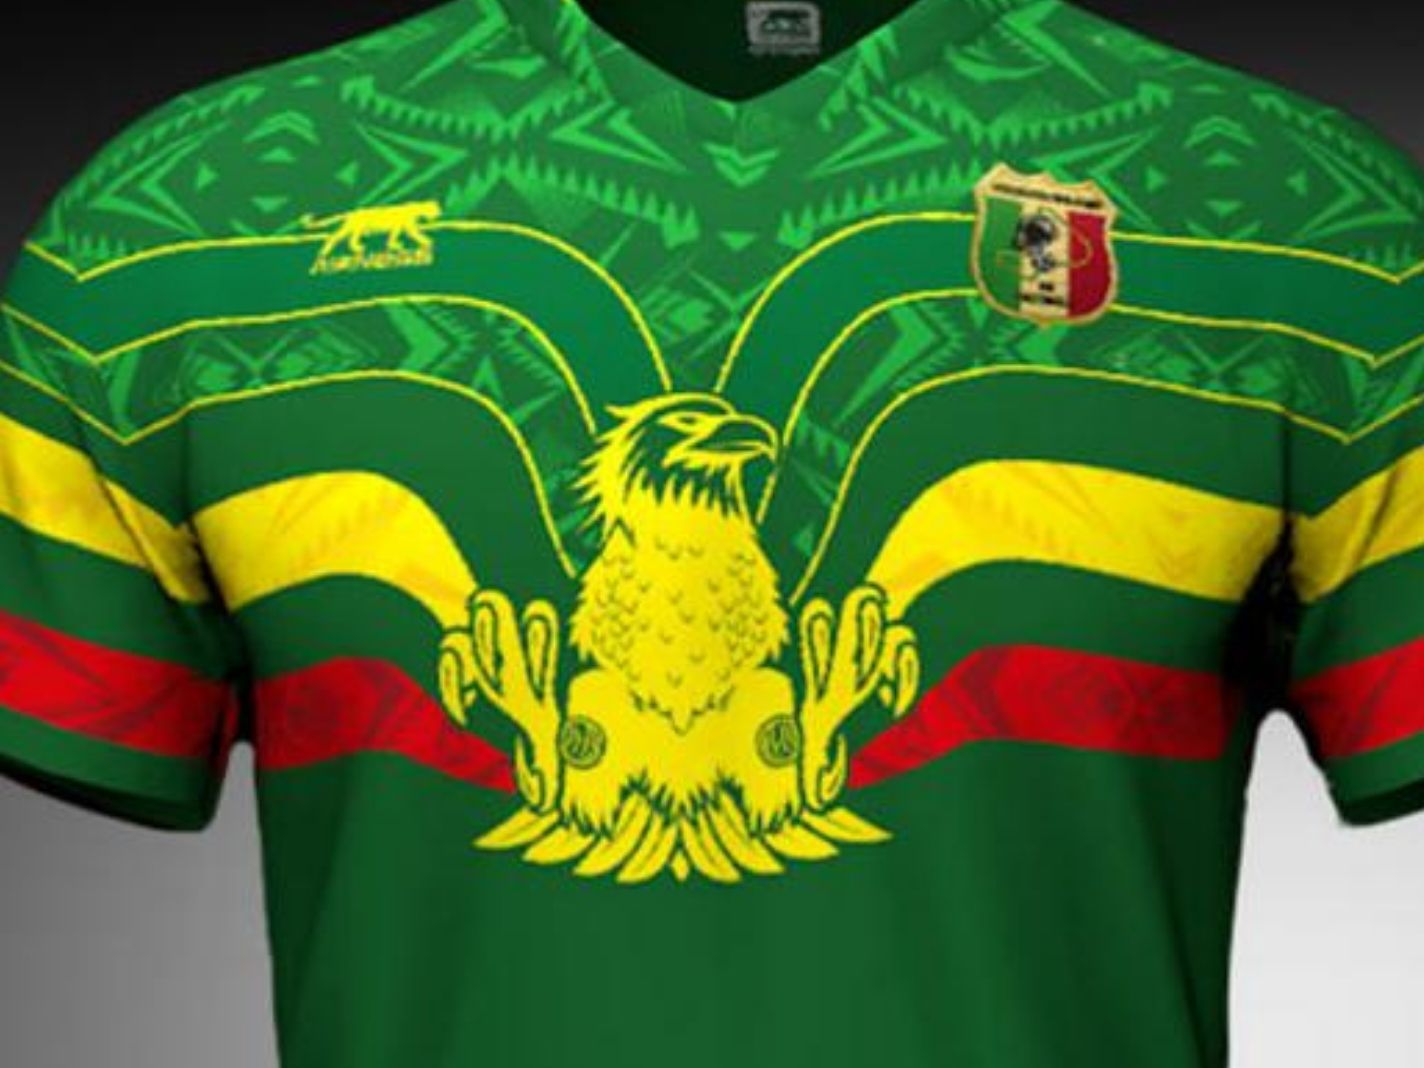 AFCON: Mali kits with giant eagle on the front is one of football’s best traditions